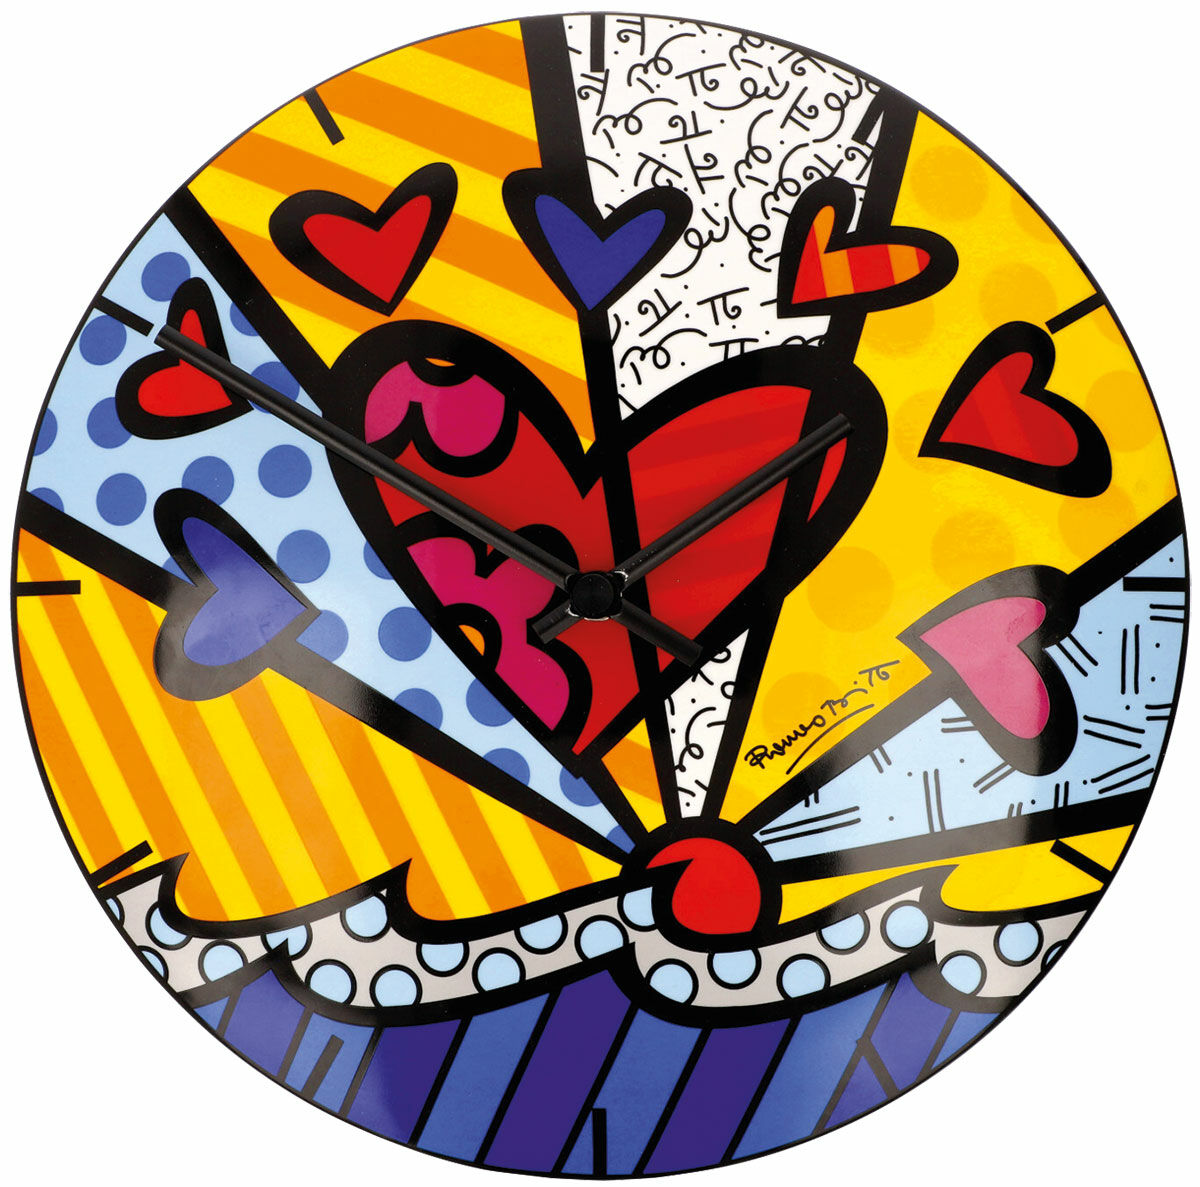 Wall clock "A New Day", porcelain by Romero Britto